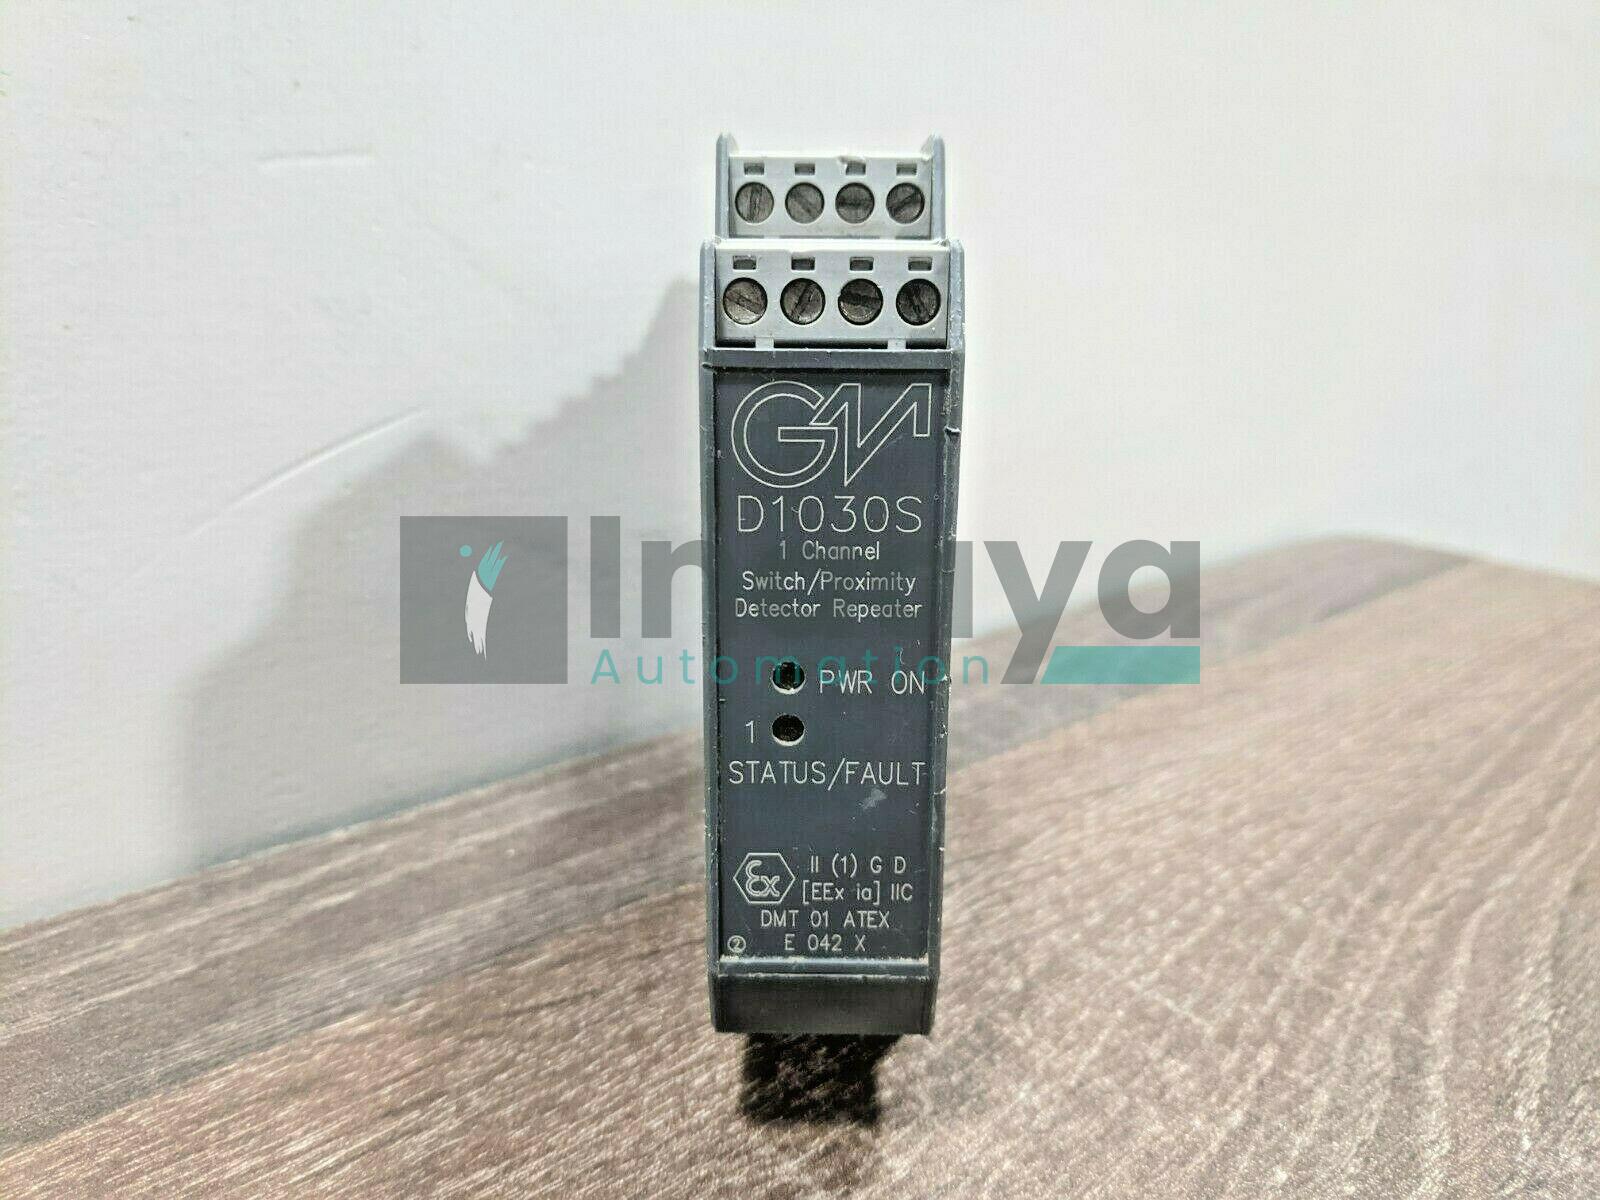 GM INTERNATIONAL D1030S 1 CHANNEL SWITCH/PROXIMITY DETECTOR REPEATER 